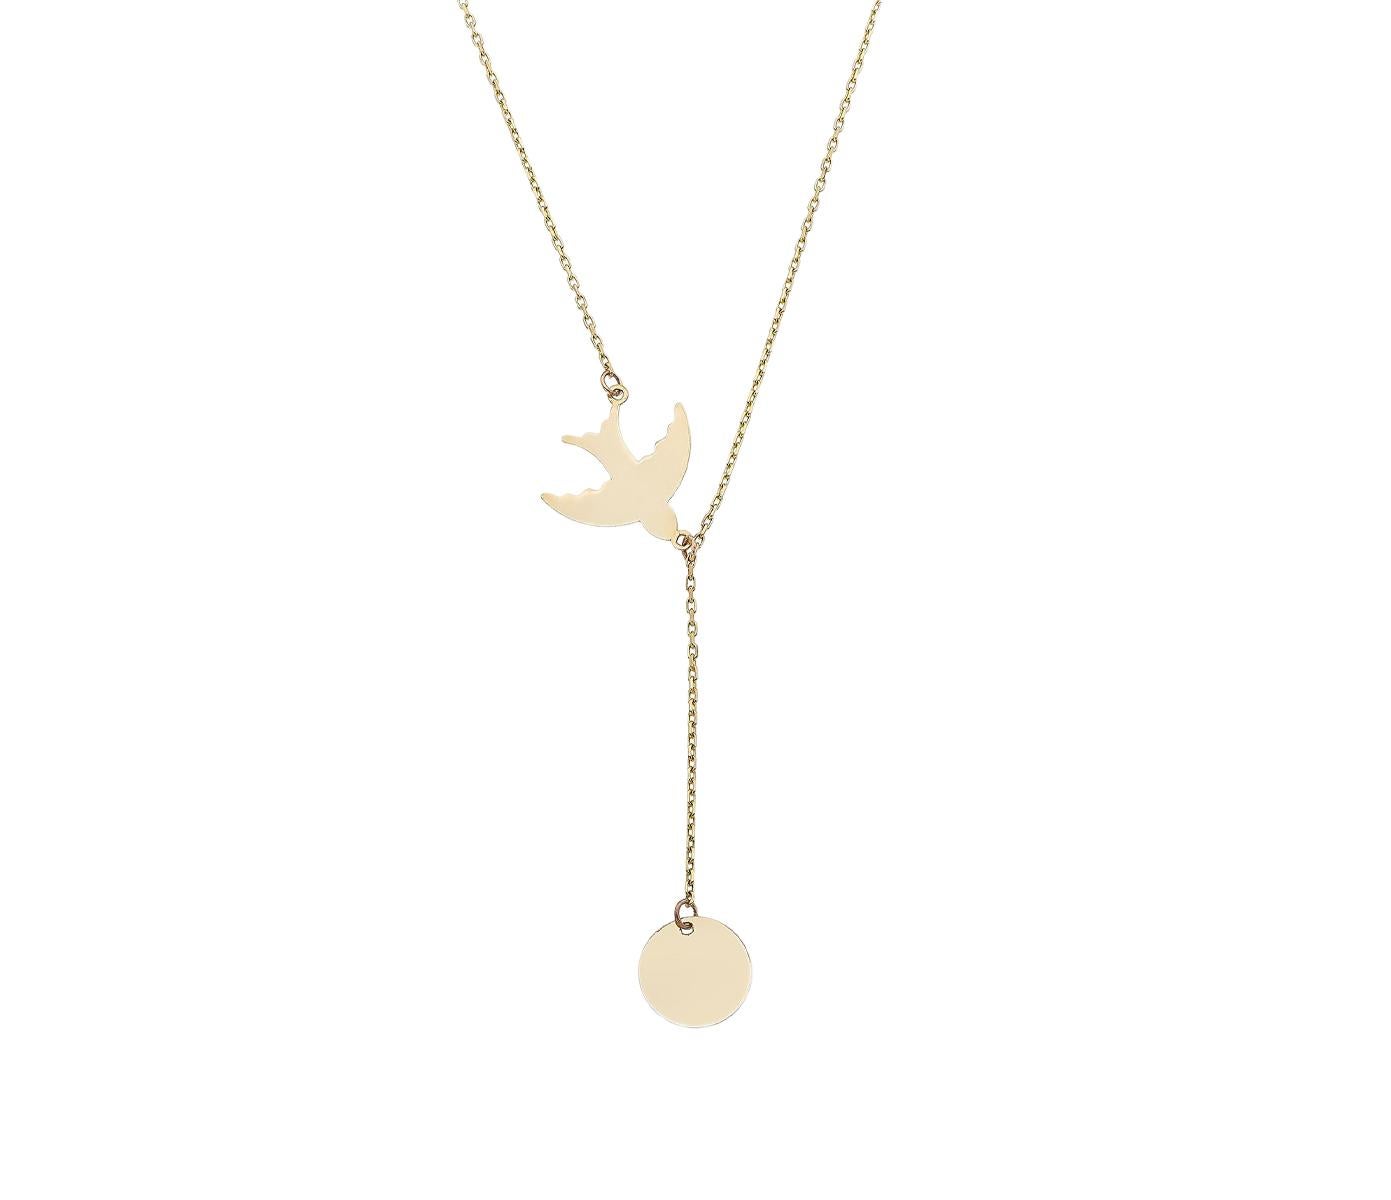 Small Swallow in Flight 14k gold Necklace. Gold Bird Necklace. Dainty Chain 14k Gold Swallow Necklace. Tiny Bird Pendant in 14k gold.
Total weight: 1.85 g.
Length:  45 sm
Style: Minimalist
Gemstones:
This necklace- ready to ship in 3 working days.